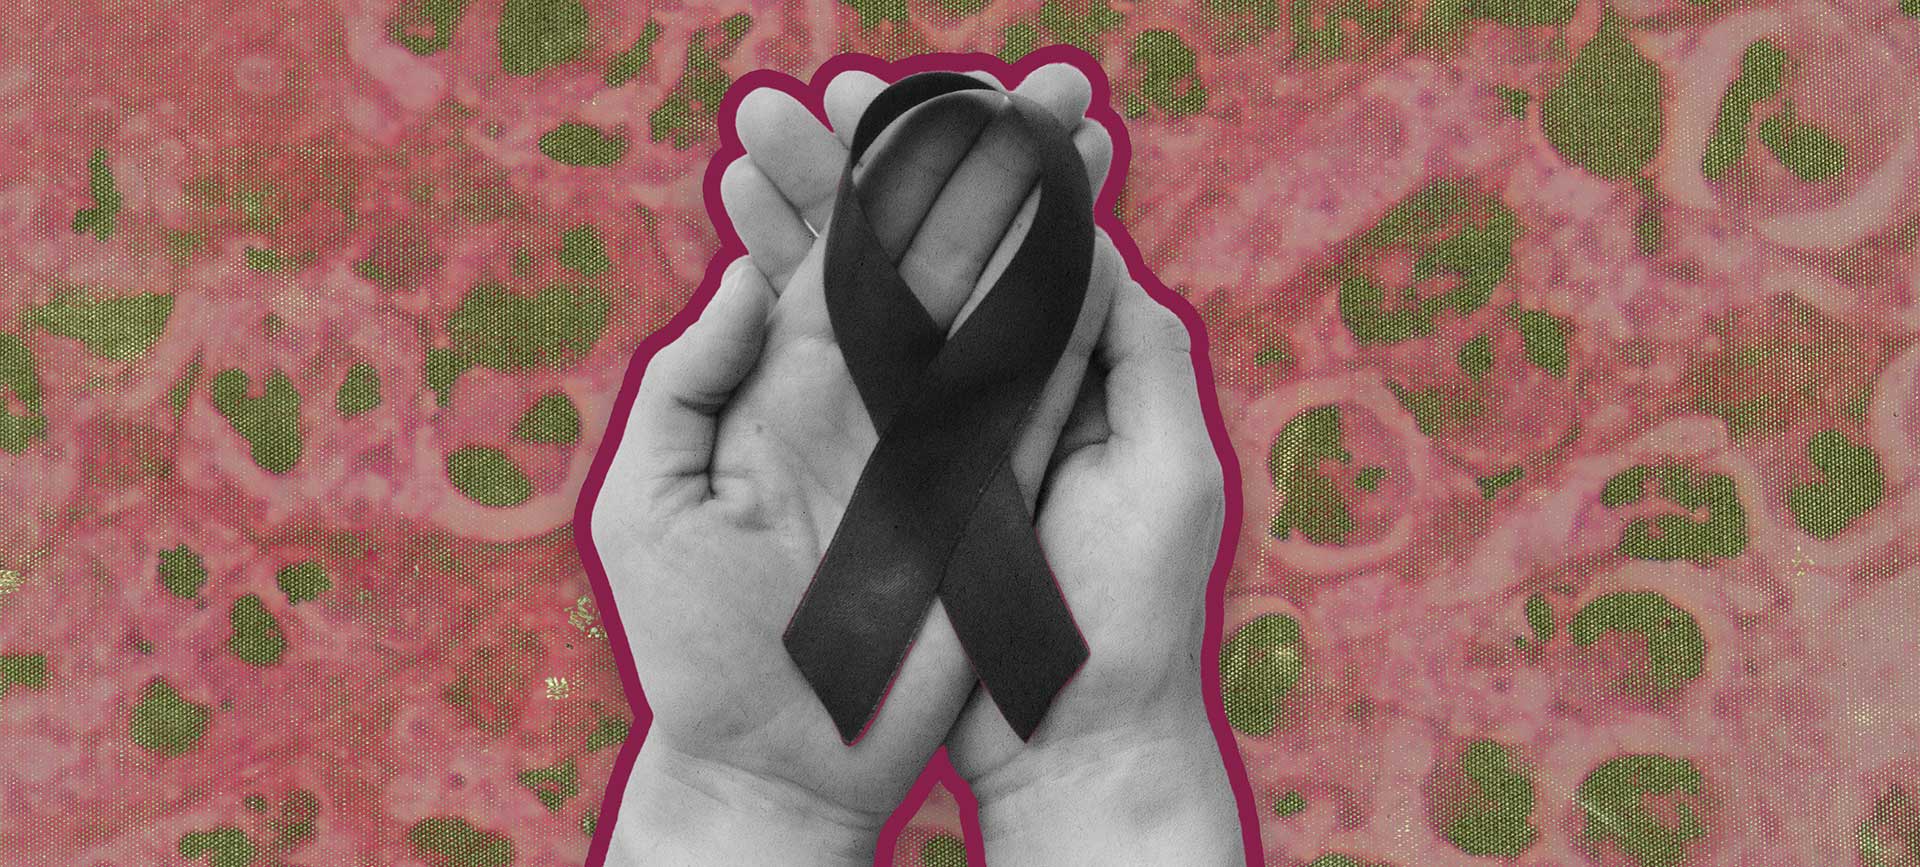 Two hands hold a black ribbon in their palms with a blotchy, pink background behind.